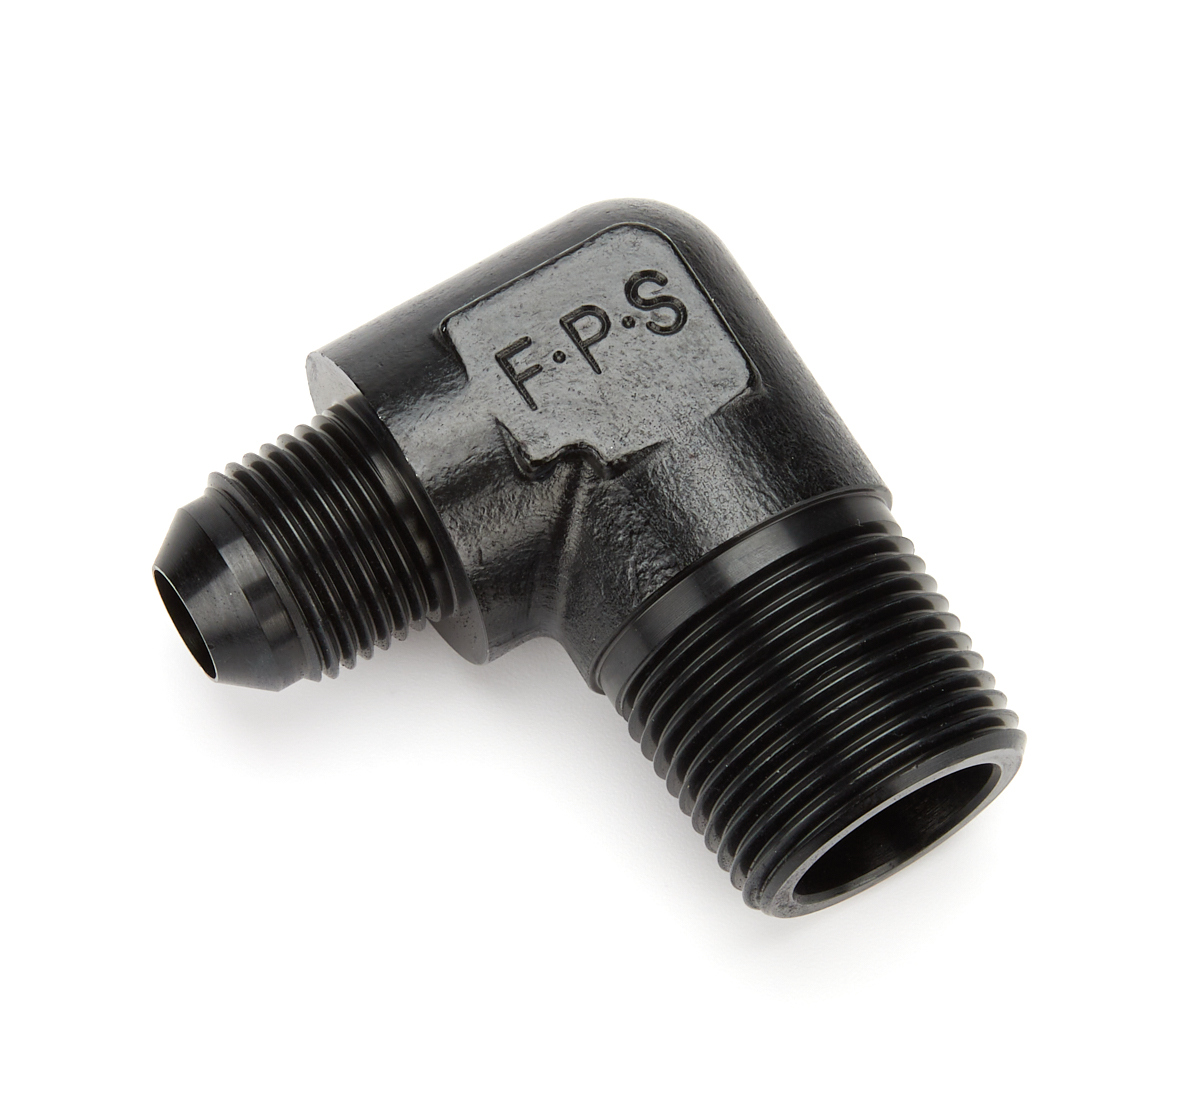 Fragola 482217-BL Fitting, Adapter, 90 Degree, 8 AN Male to 3/4 in NPT Male, Aluminum, Black Anodized, Each